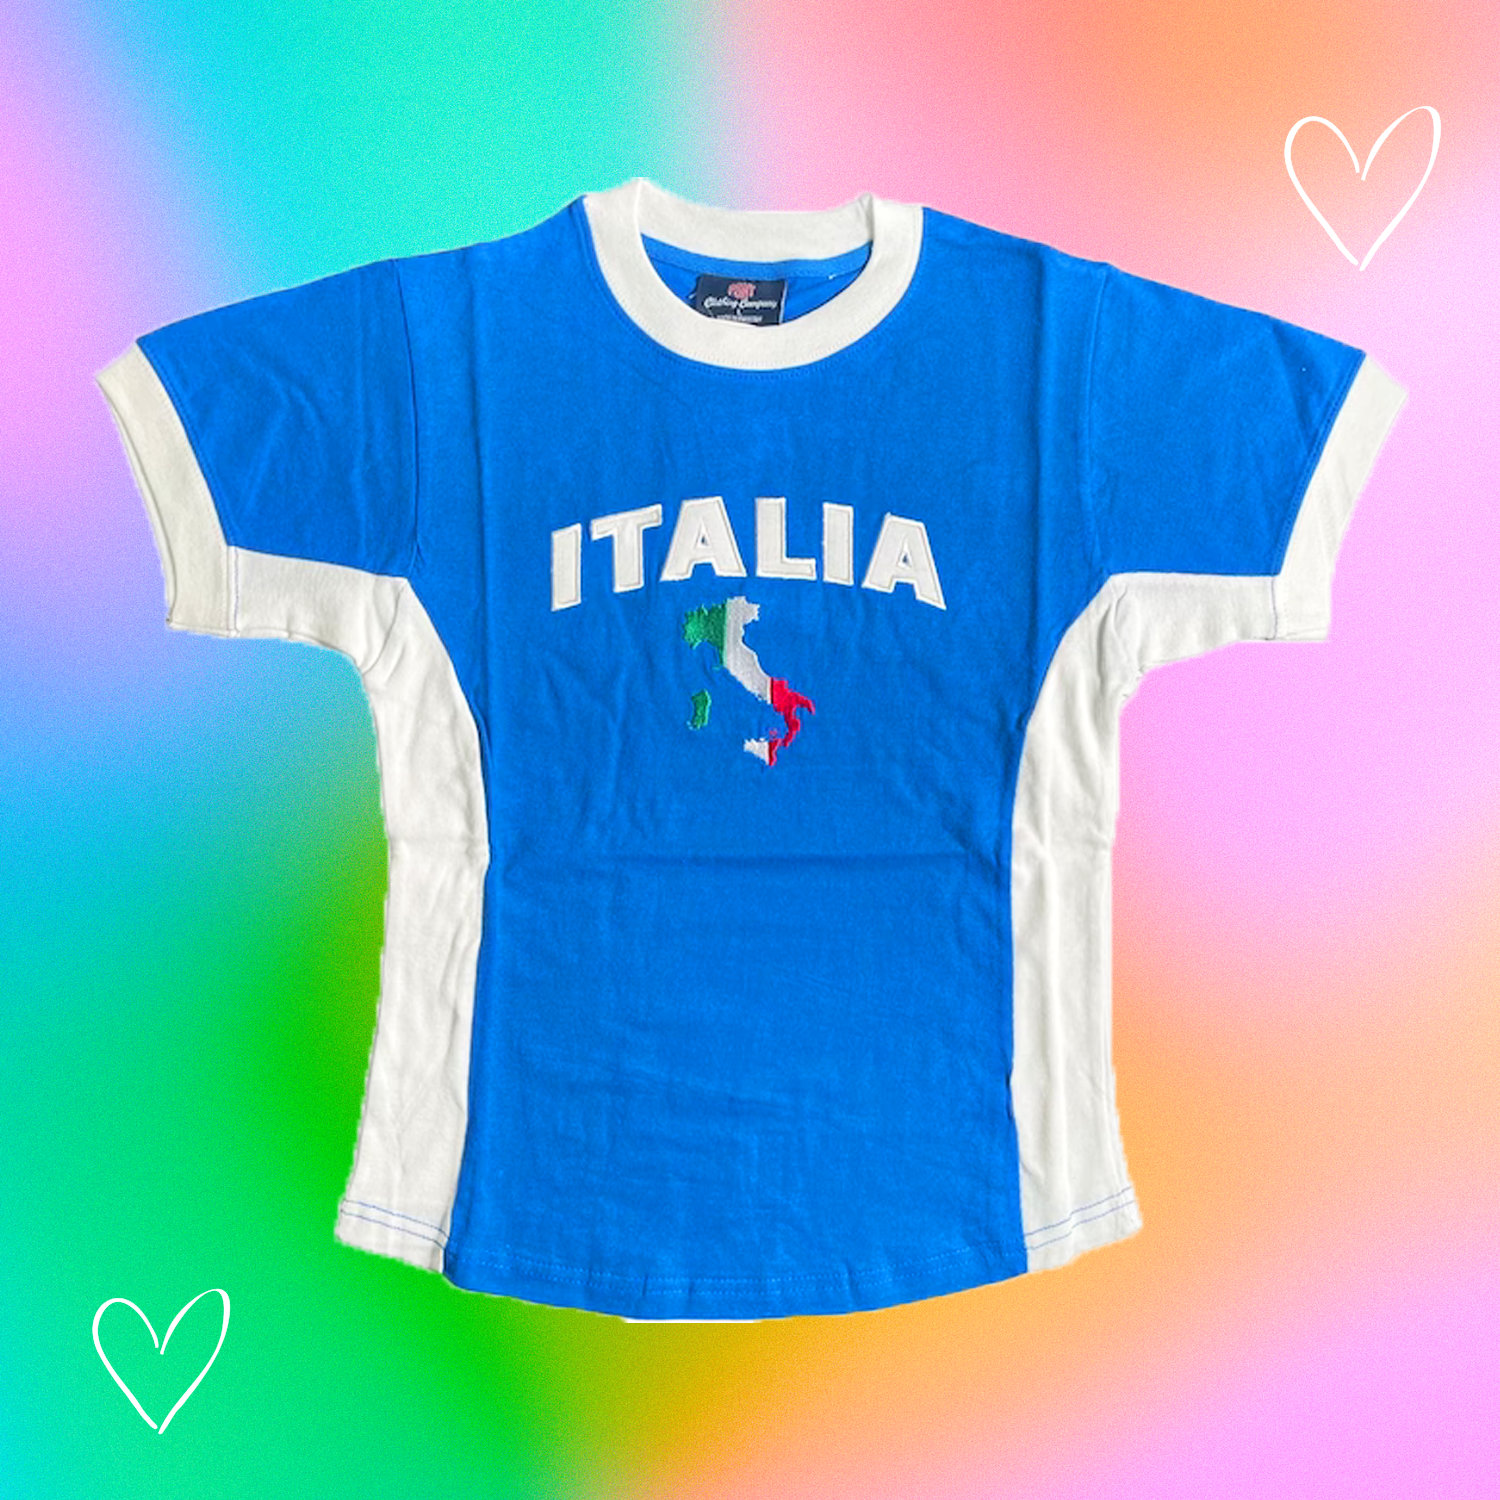 Authentic Vintage Italy Italia Jersey for a Stylish Y2K Summer Look